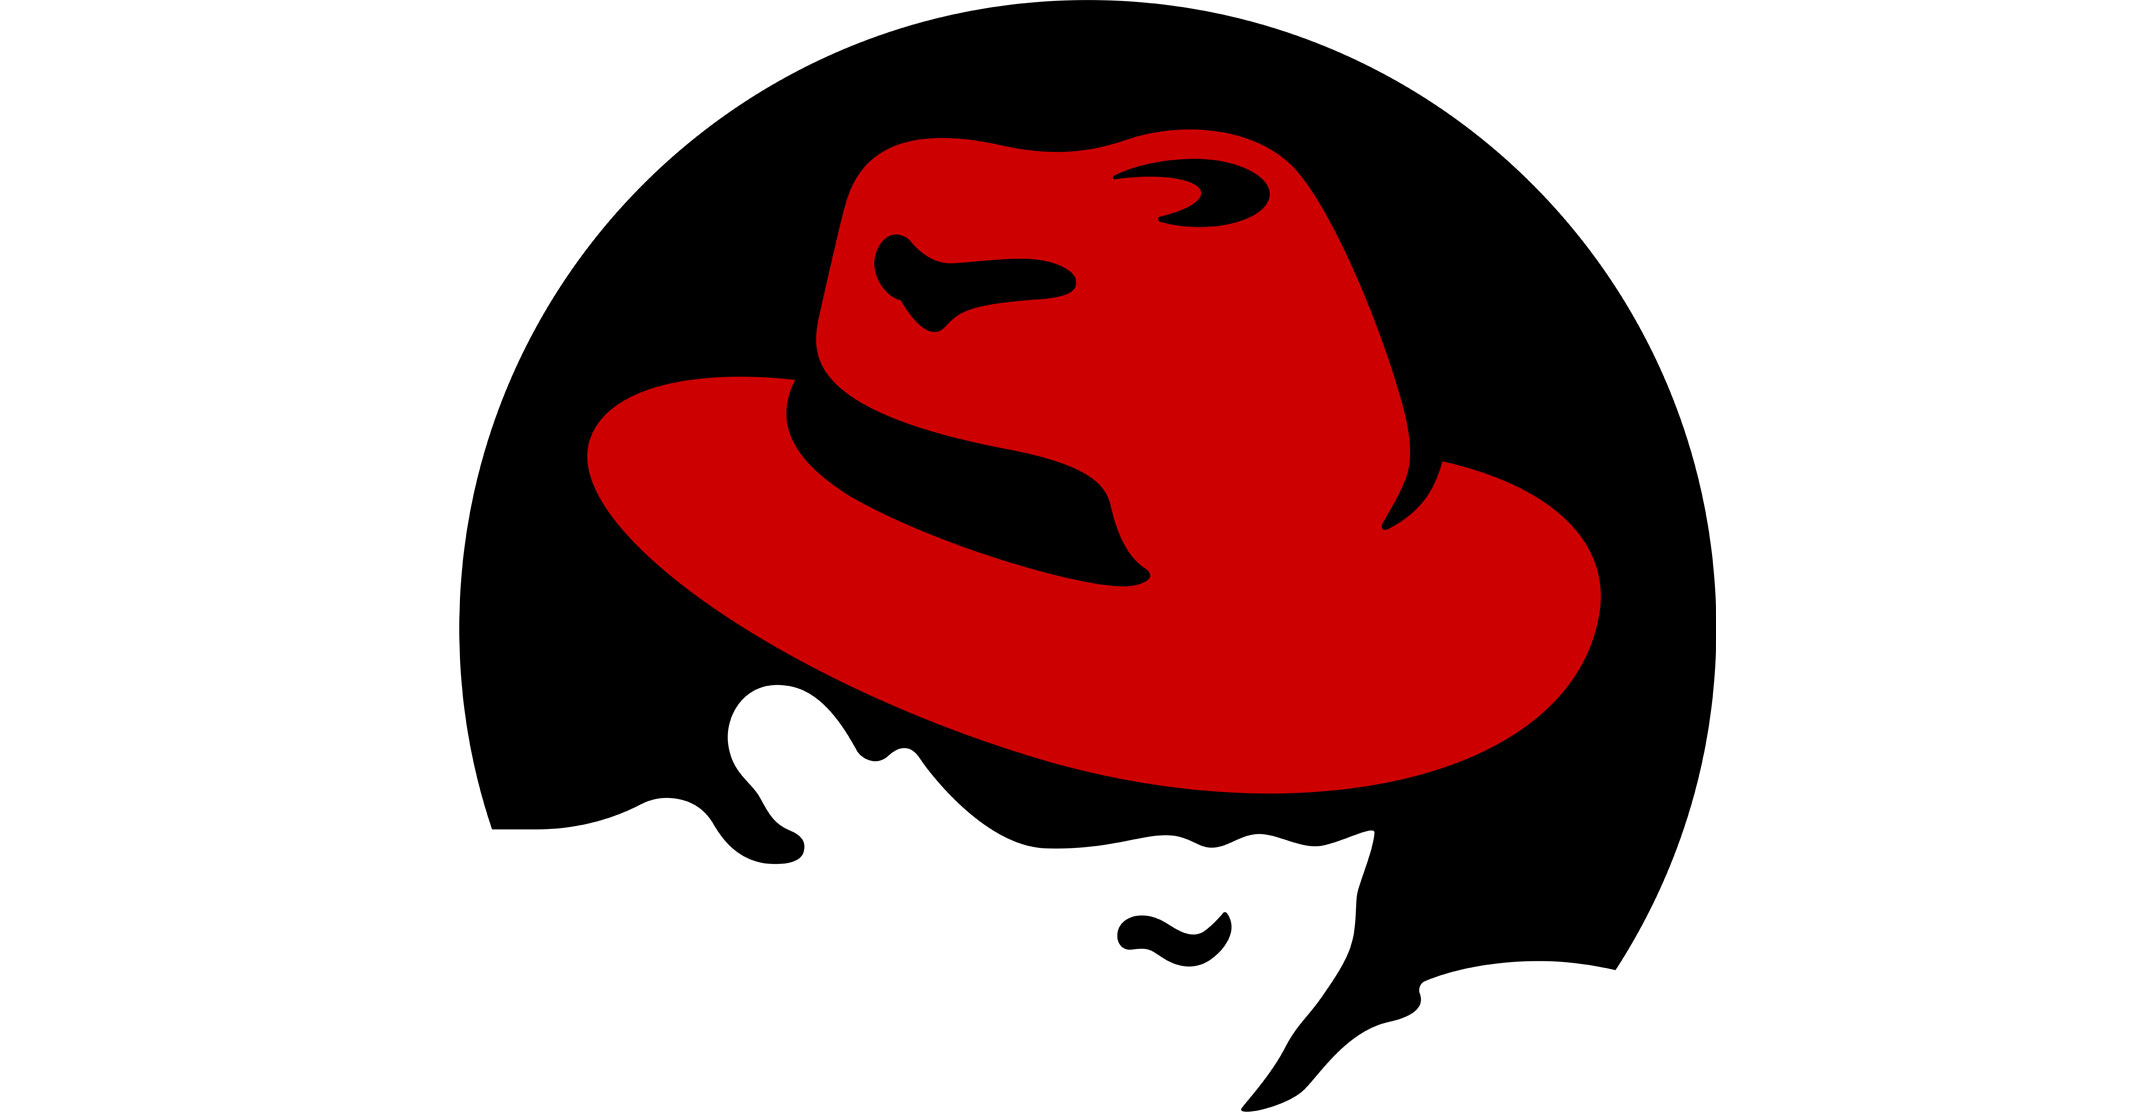 Red hat 2. Red hat. Шляпа Red hat. Значок Red hat. Red hat Enterprise Linux.